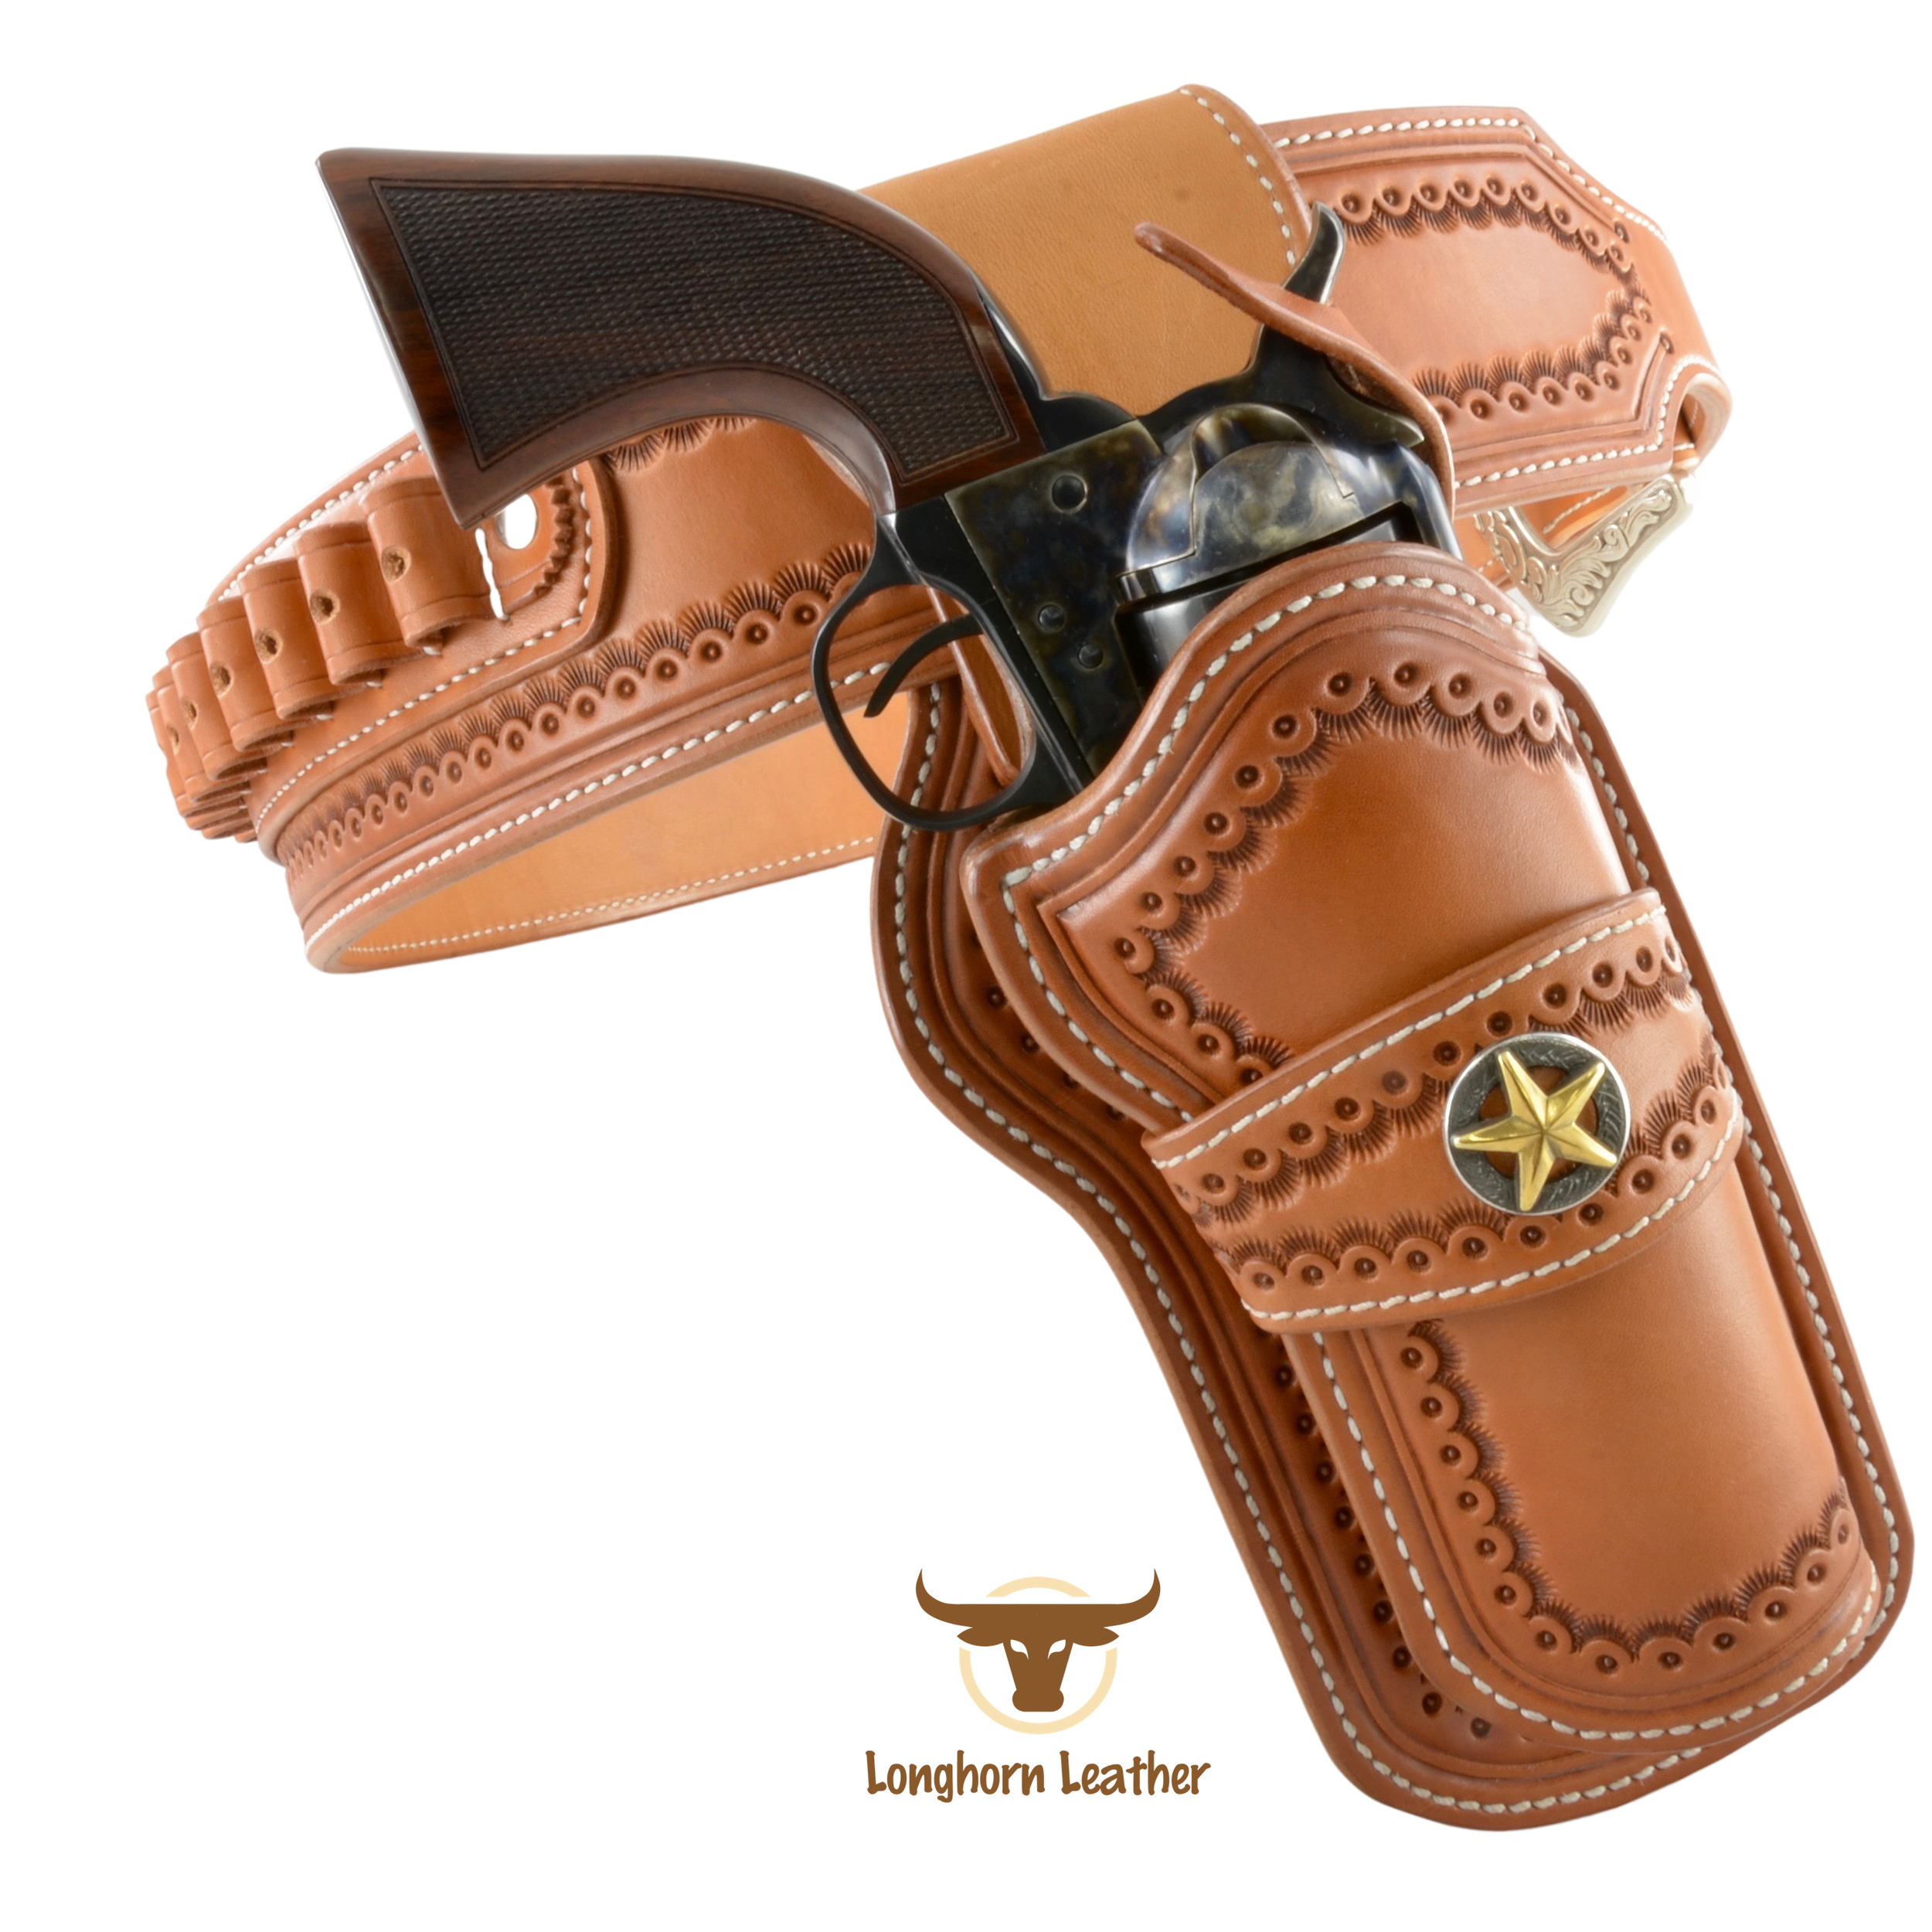 Custom leather single action holster and cartridge belt featuring the "Cimarron" design.  Individually handcrafted at Longhorn Leather AZ.